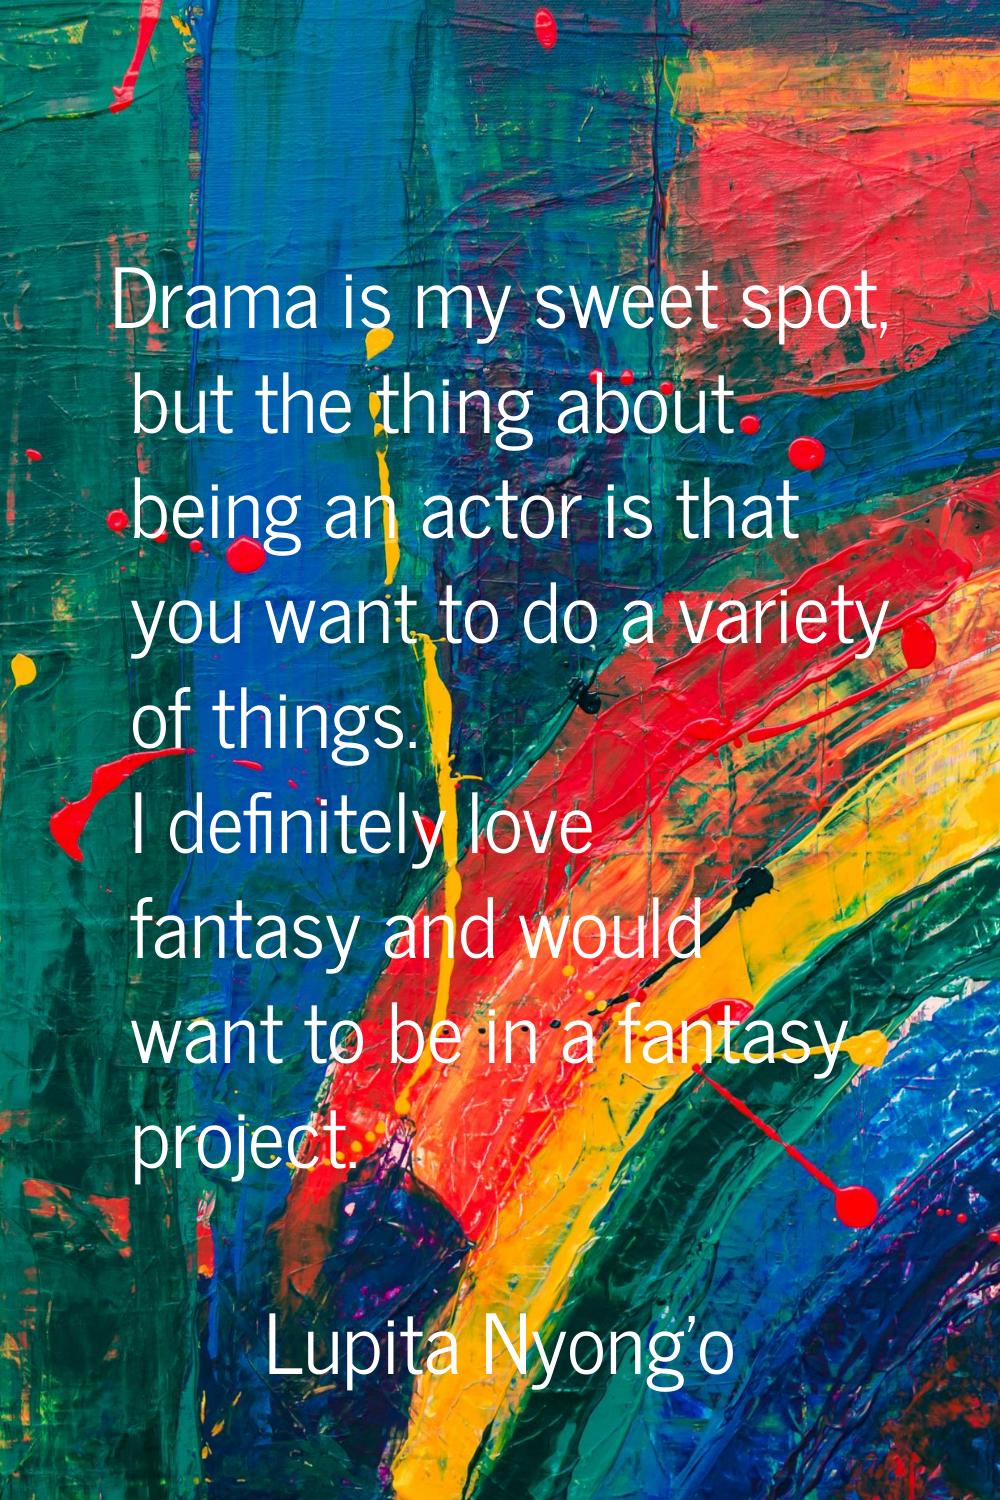 Drama is my sweet spot, but the thing about being an actor is that you want to do a variety of thin